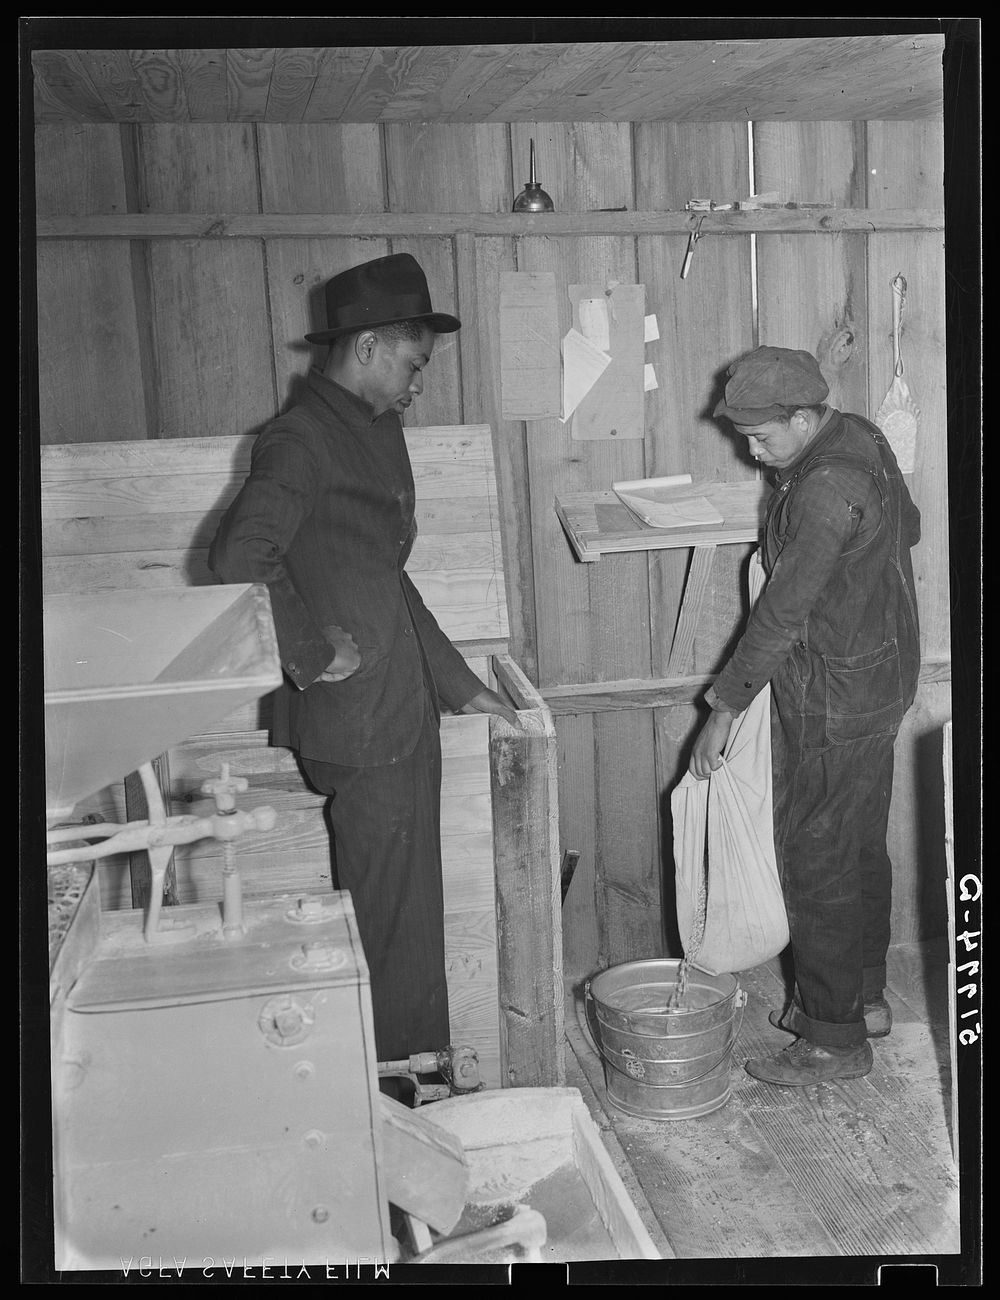 Inside the cooperative grist mill. Prairie Farms, Alabama. Sourced from the Library of Congress.